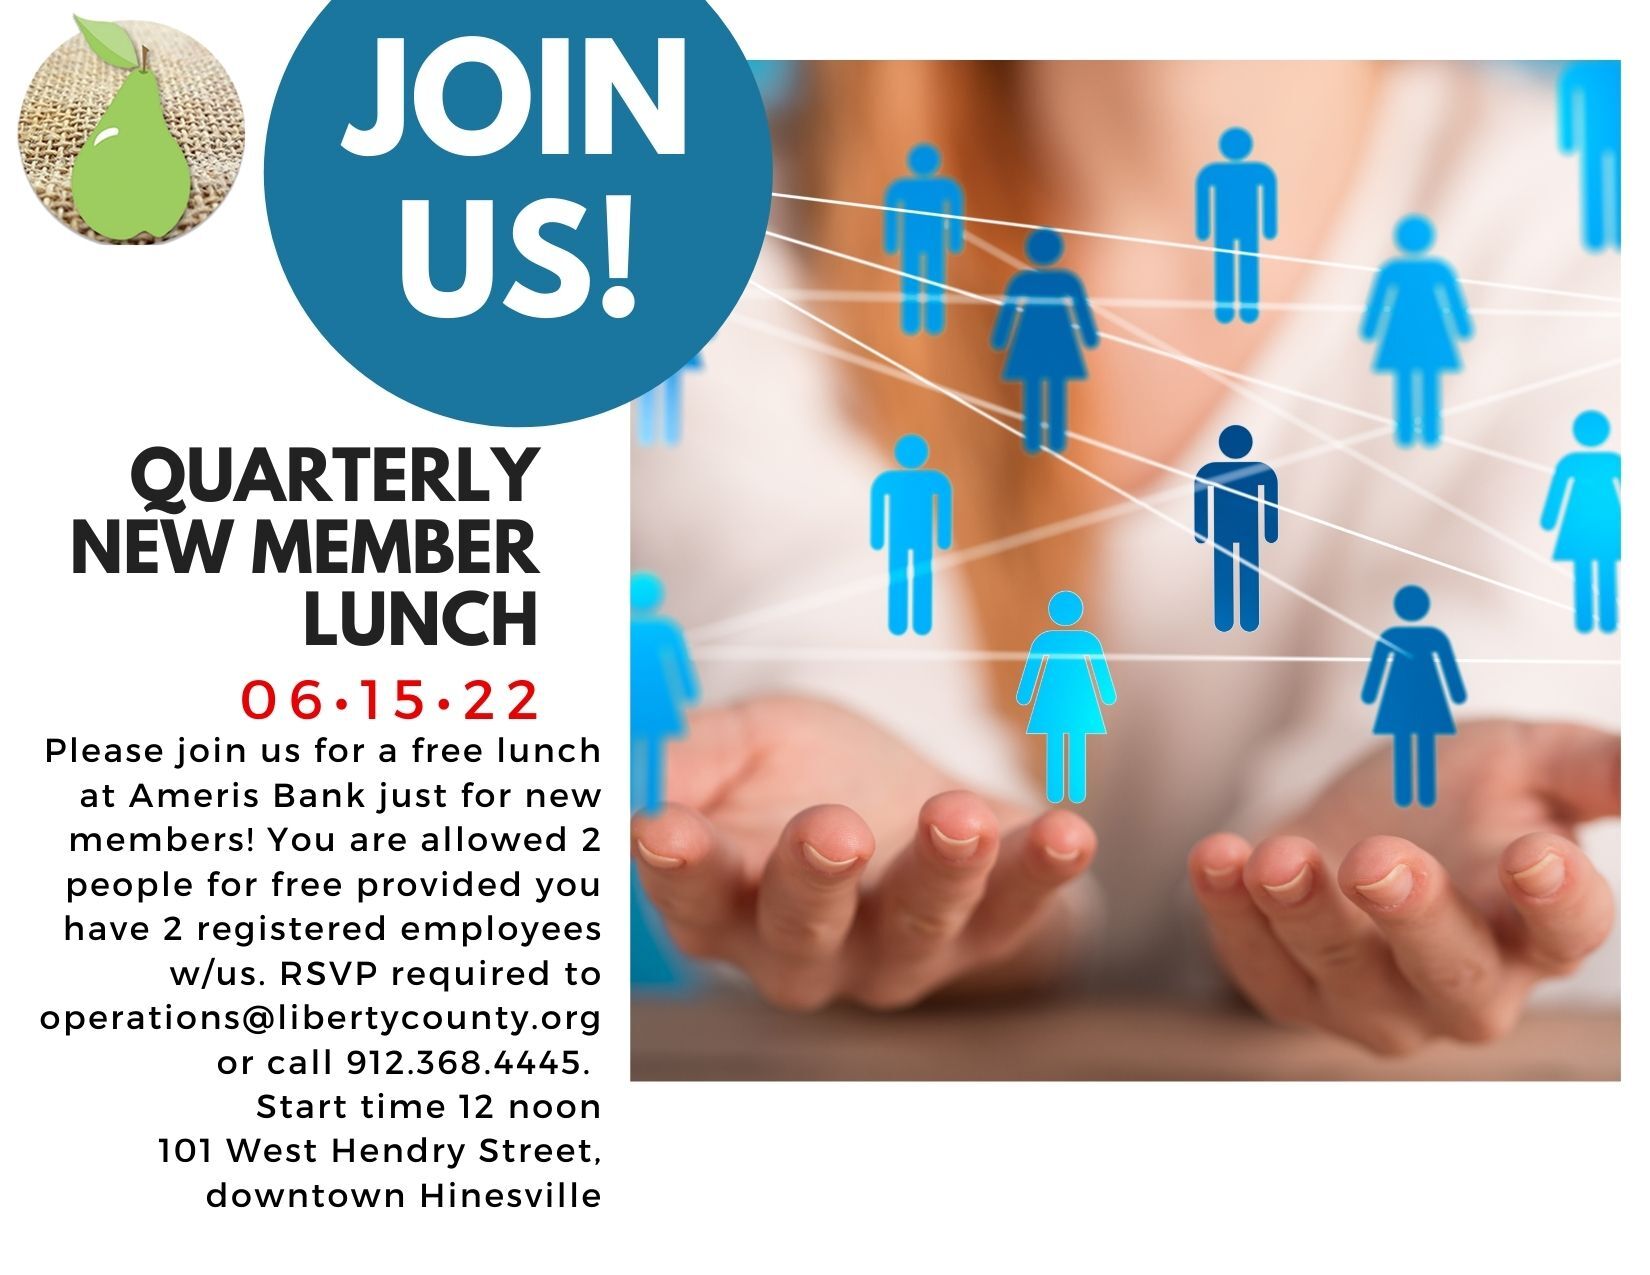 Liberty County Chamber of Commerce quarterly new member lunch